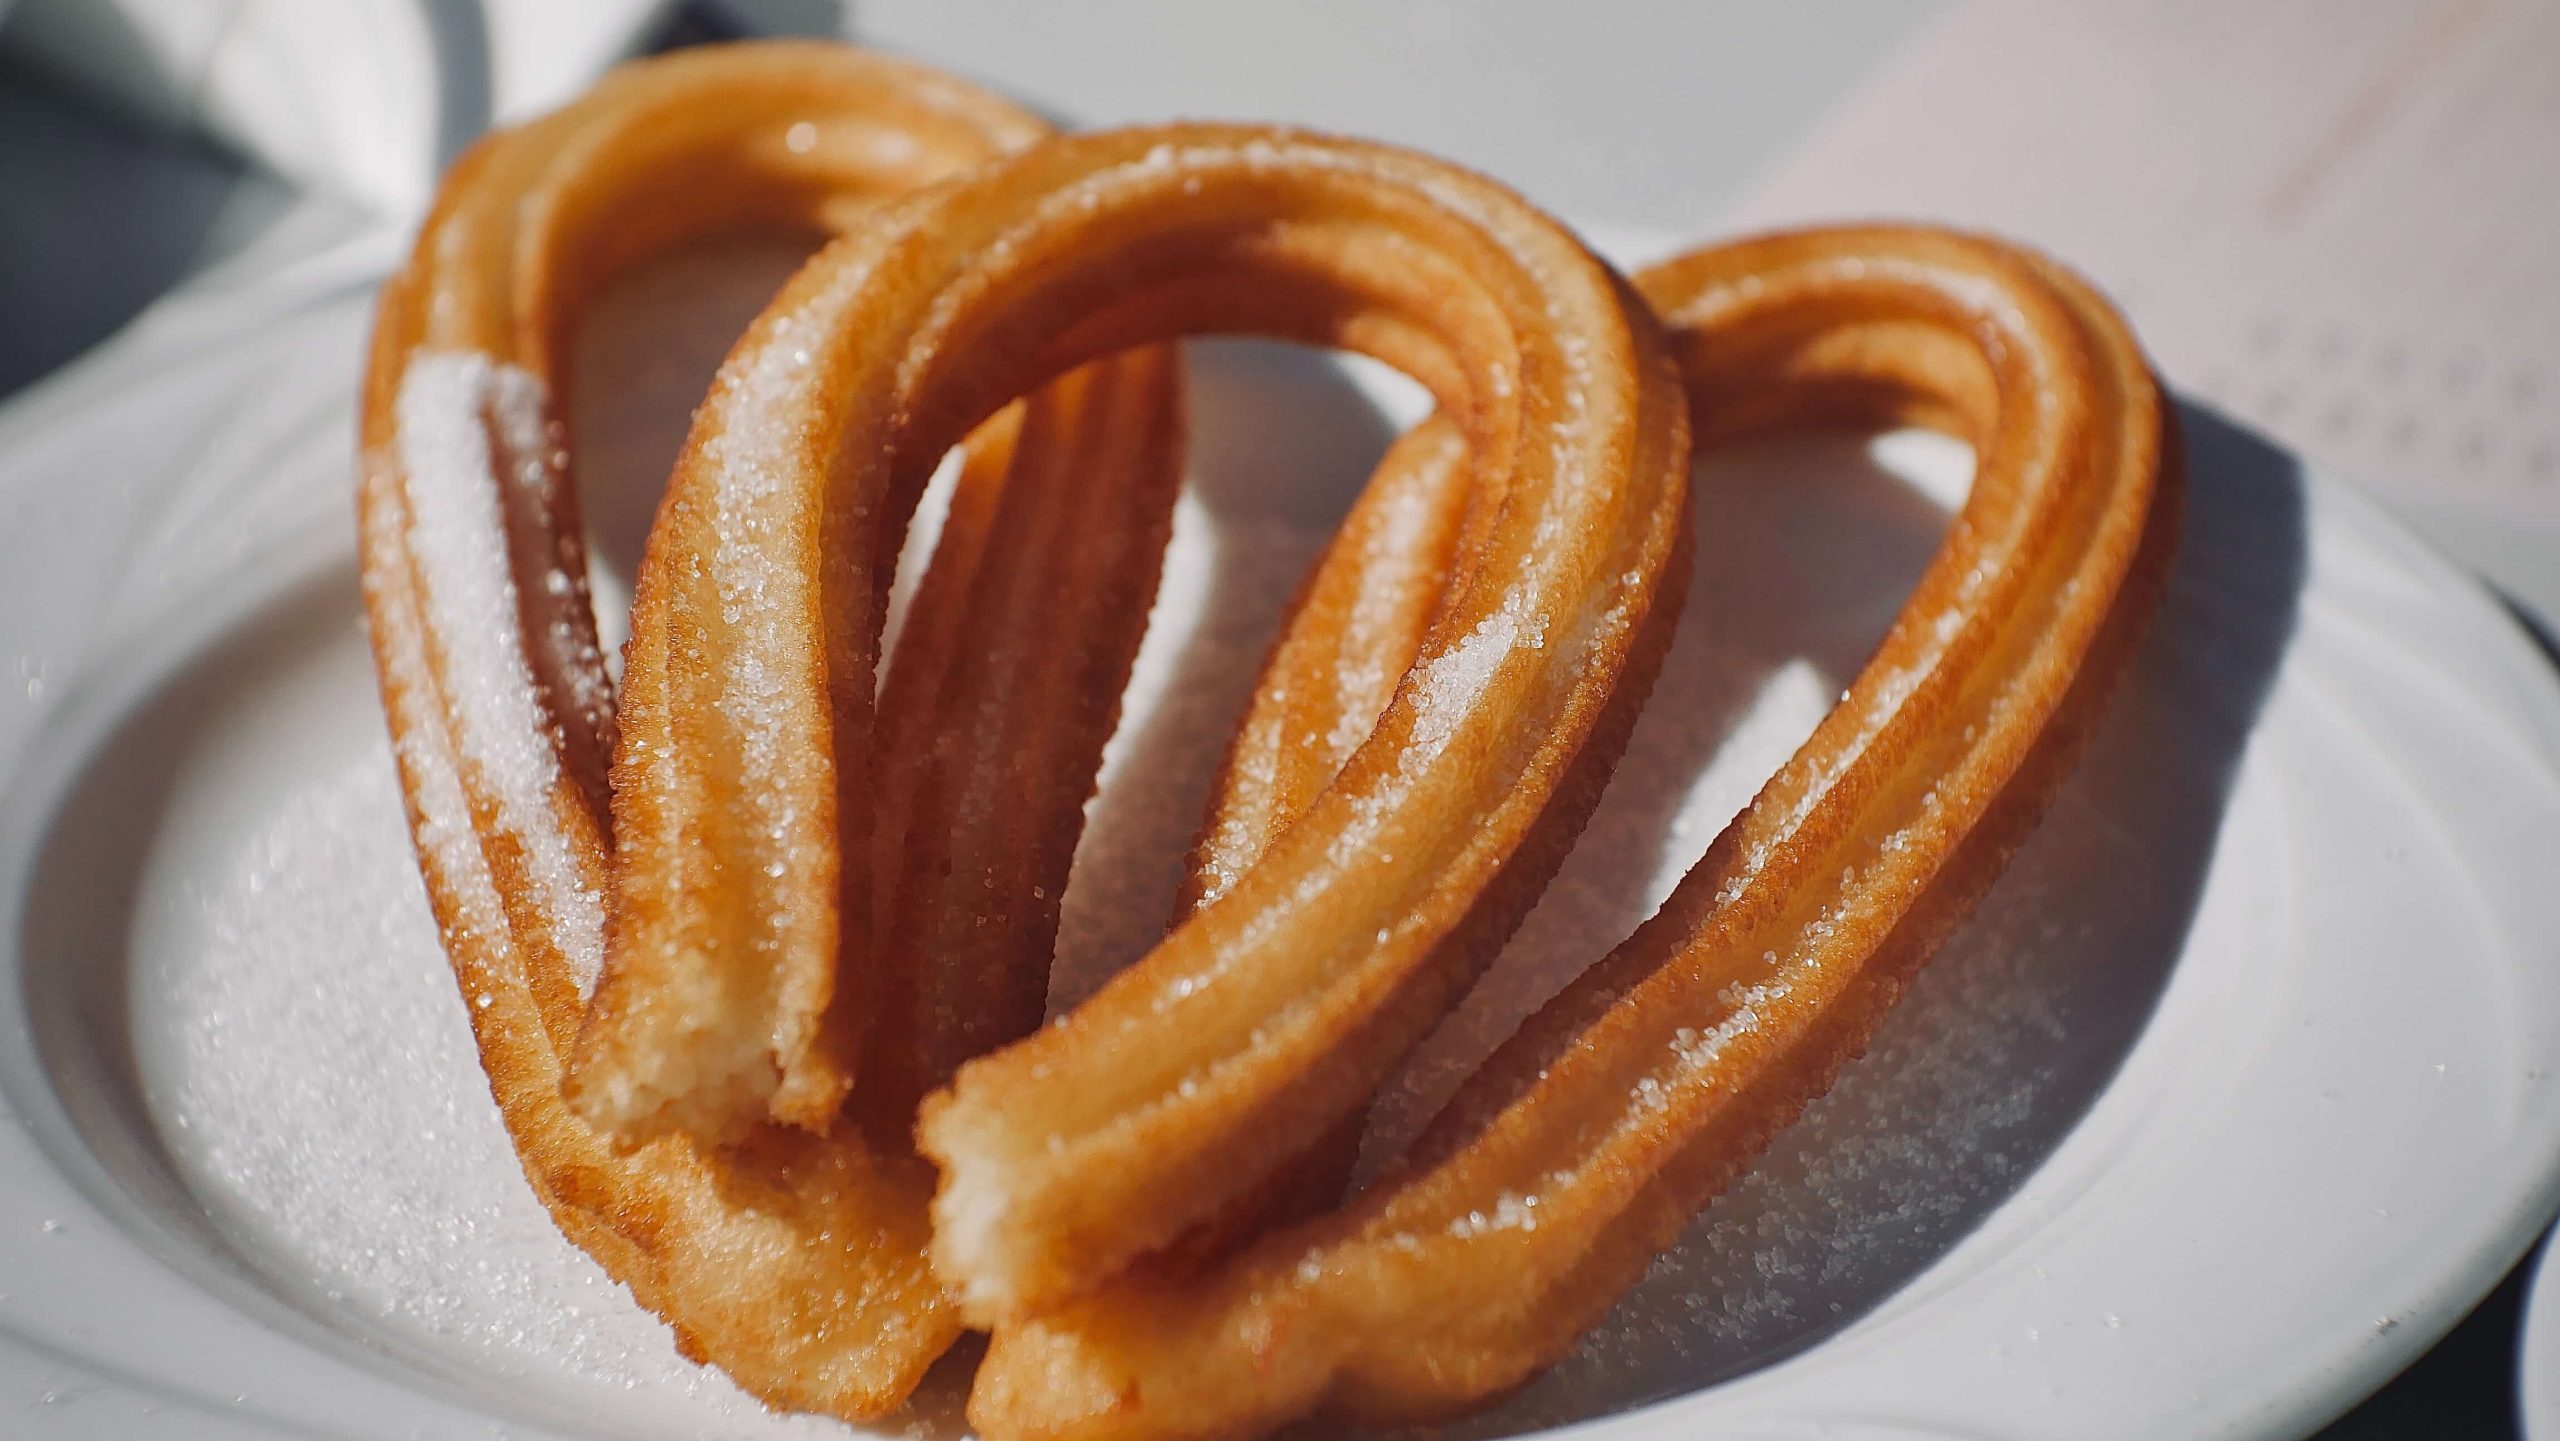 How Many Calories In A Churro?